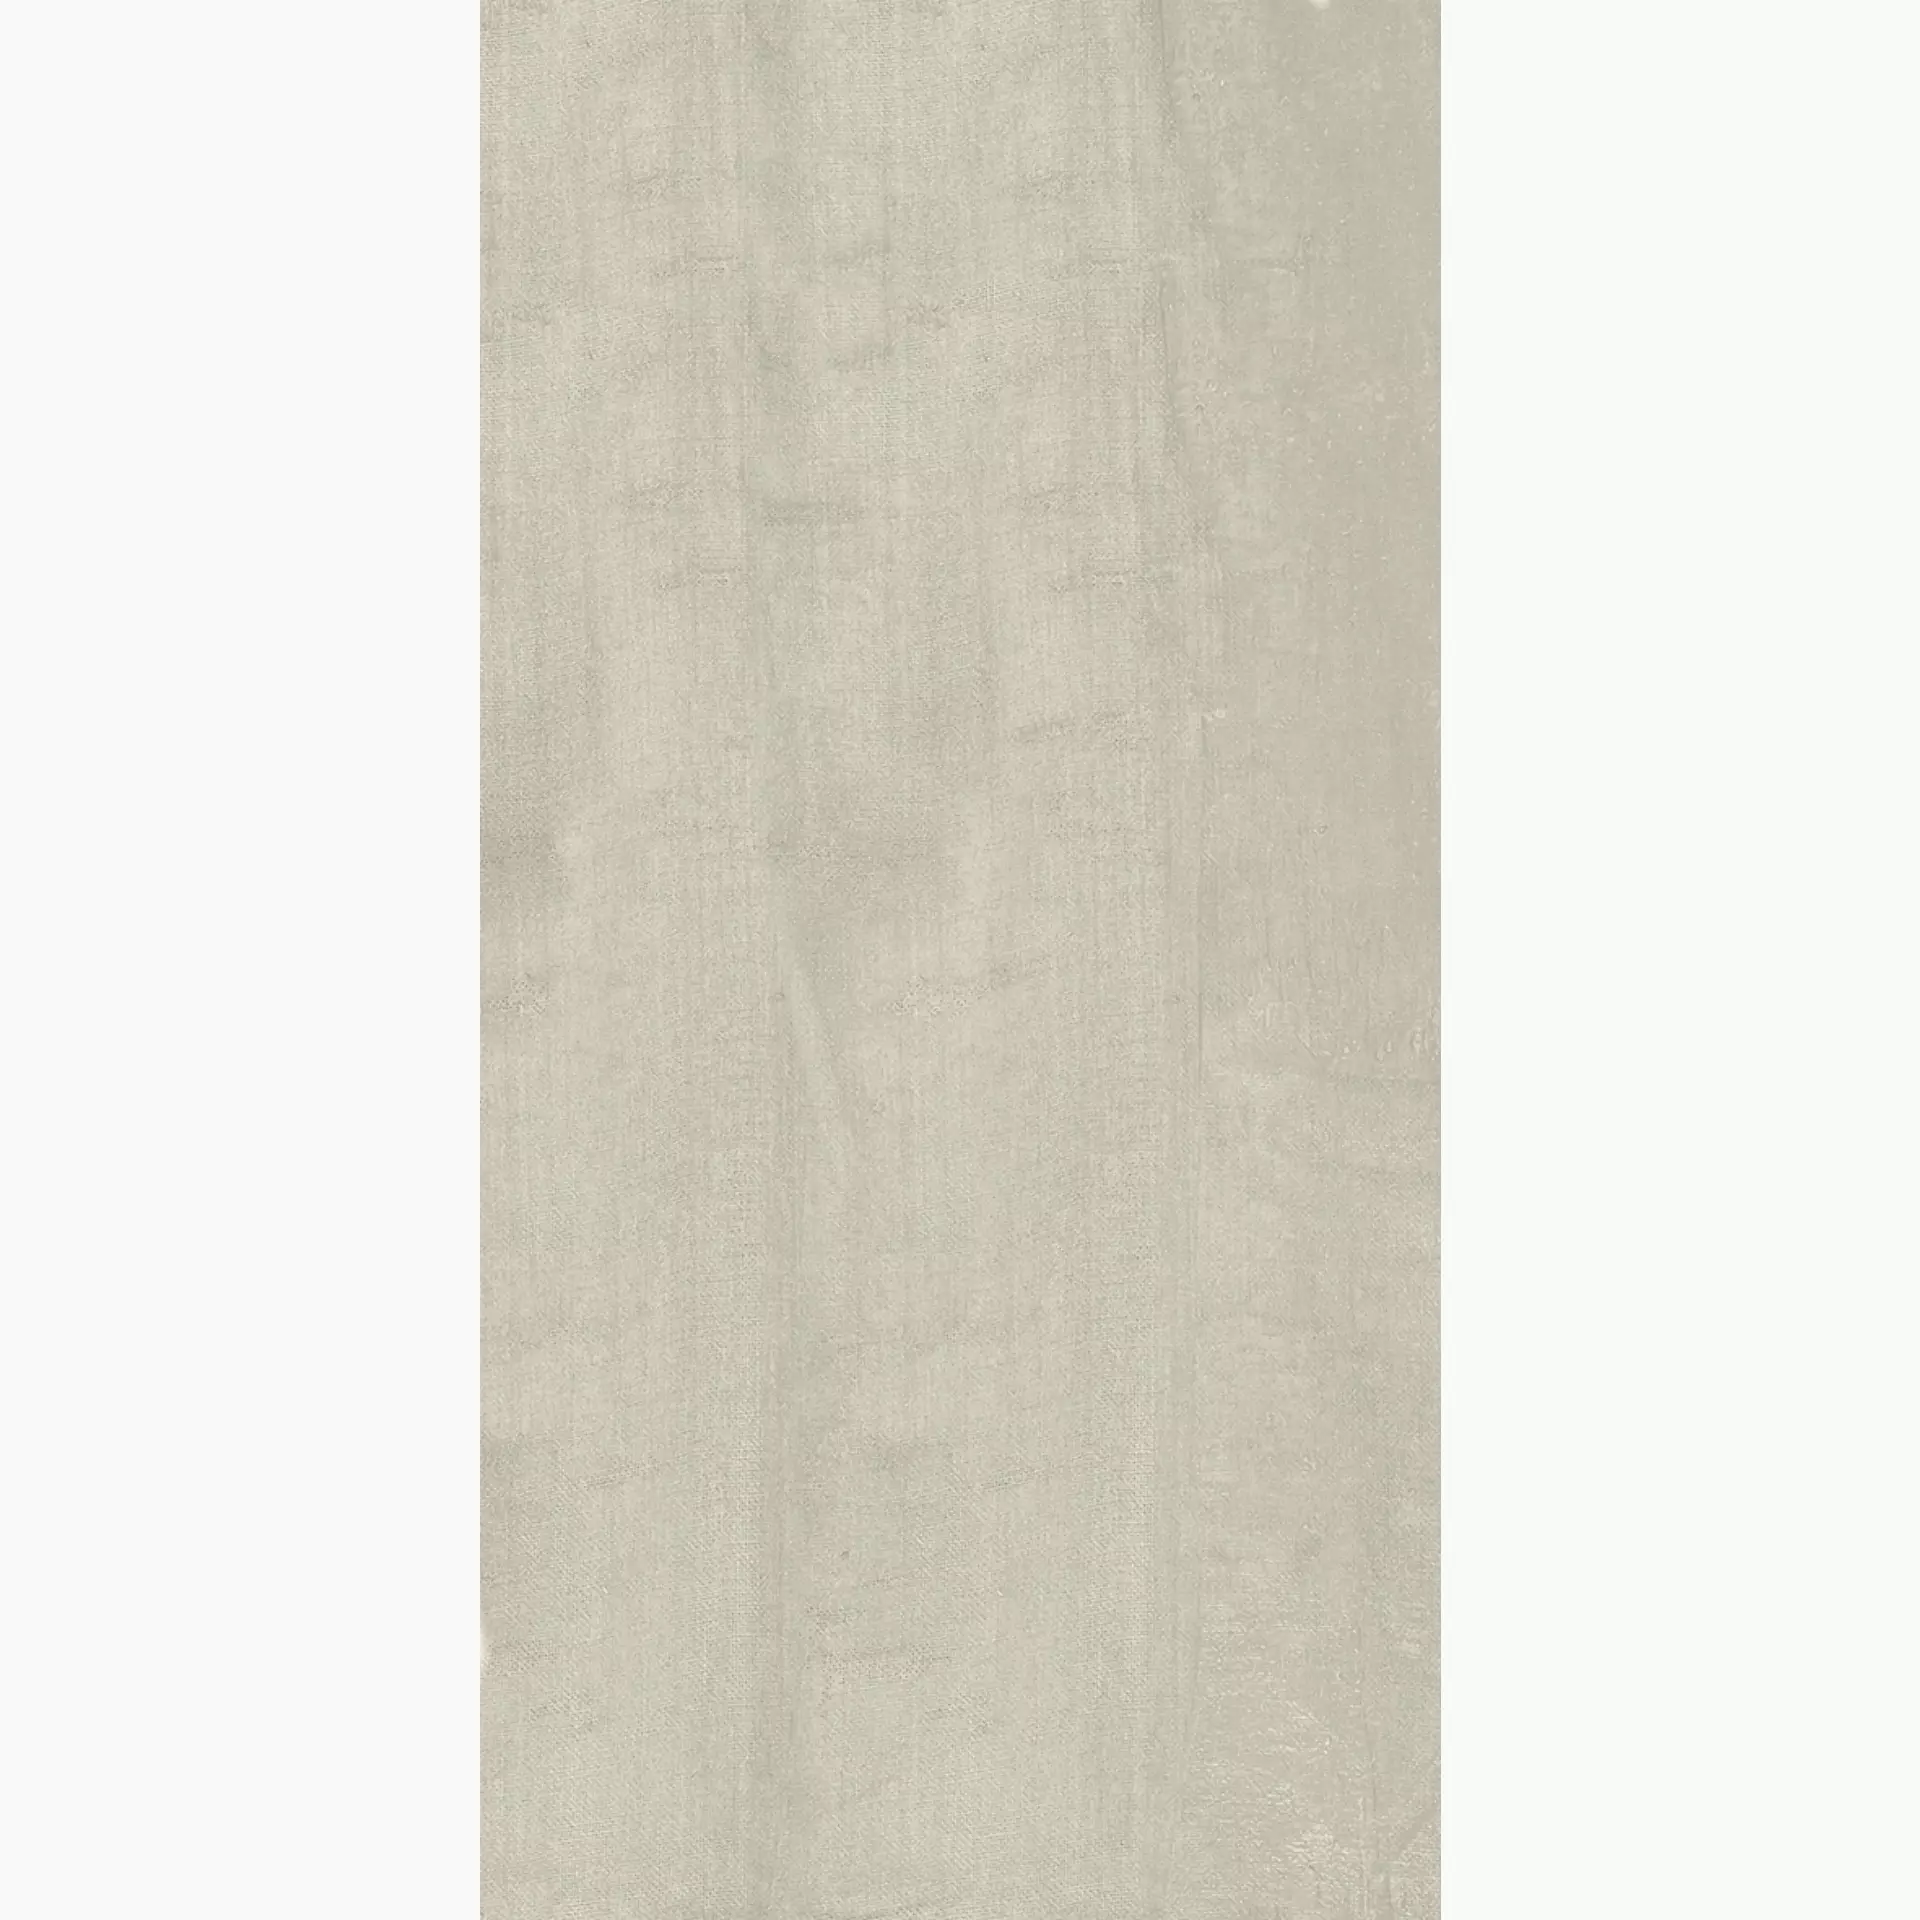 Provenza Gesso Taupe Linen Naturale E34A 40x80cm rectified 9,5mm